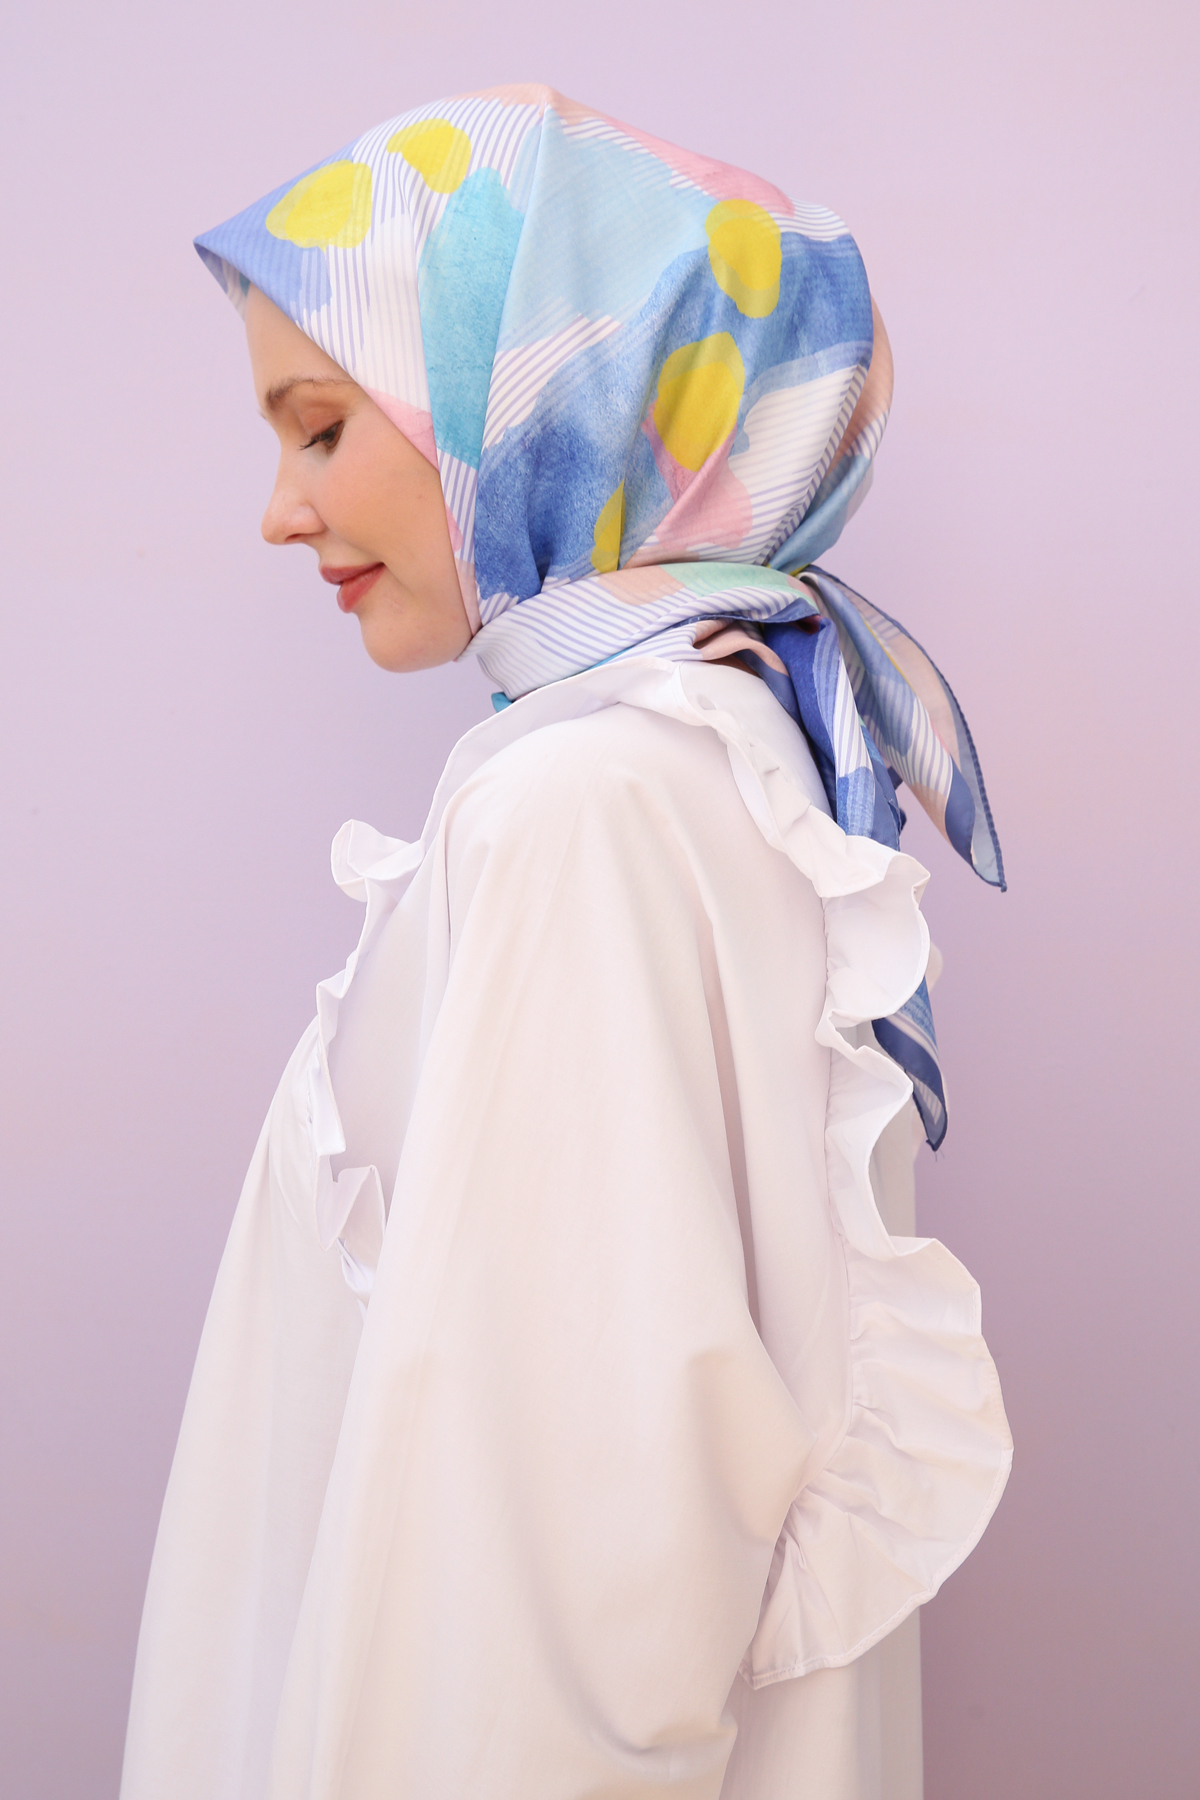 A model wears ALL10727 - Scarf - Purple, wholesale Scarf of Allday to display at Lonca